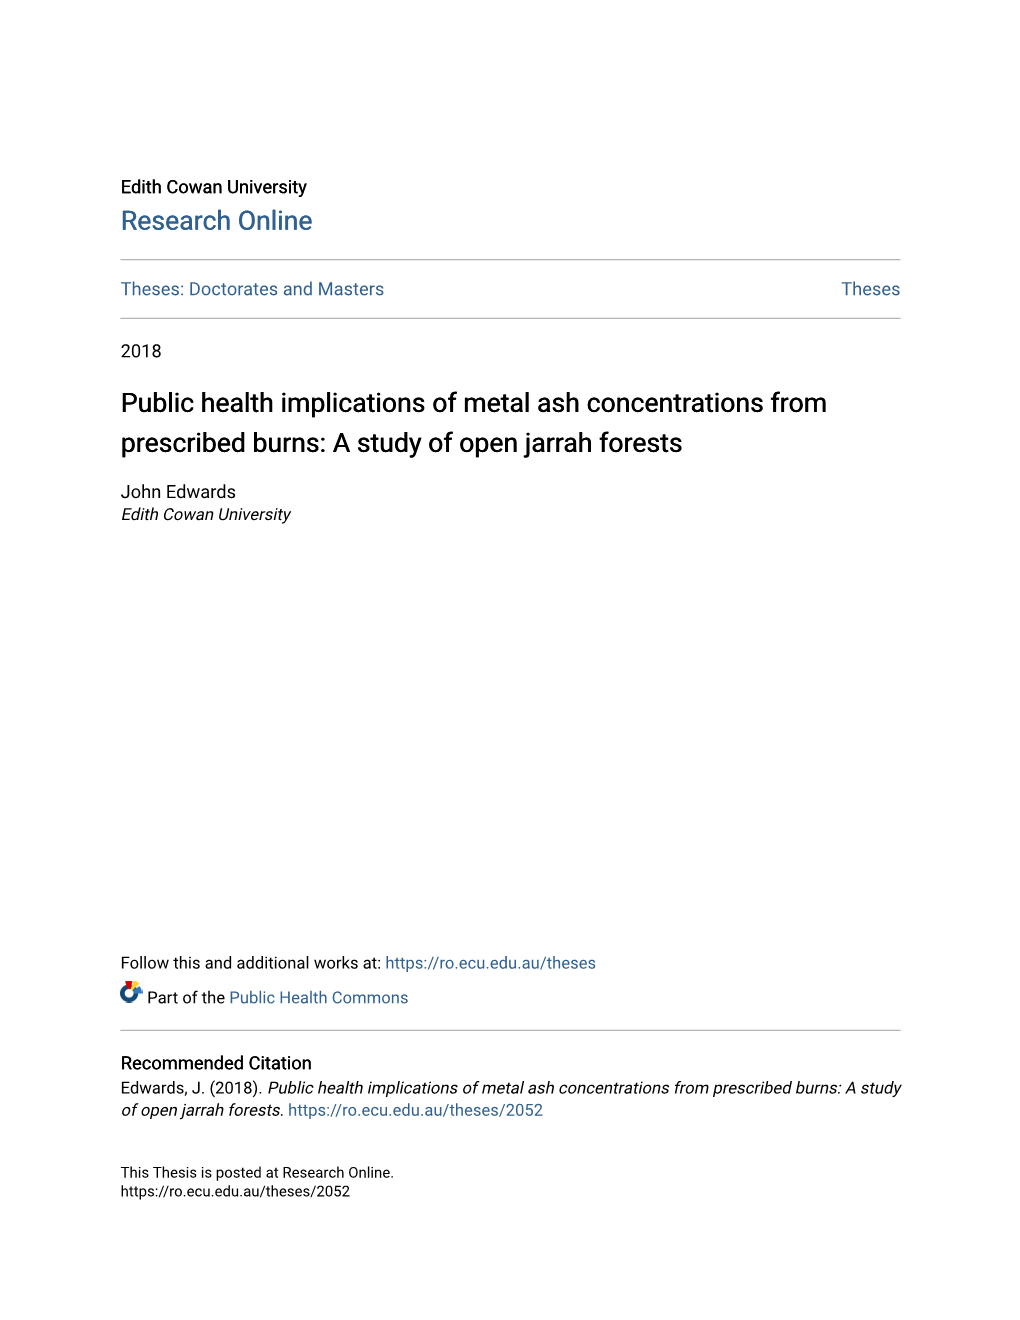 Public Health Implications of Metal Ash Concentrations from Prescribed Burns: a Study of Open Jarrah Forests